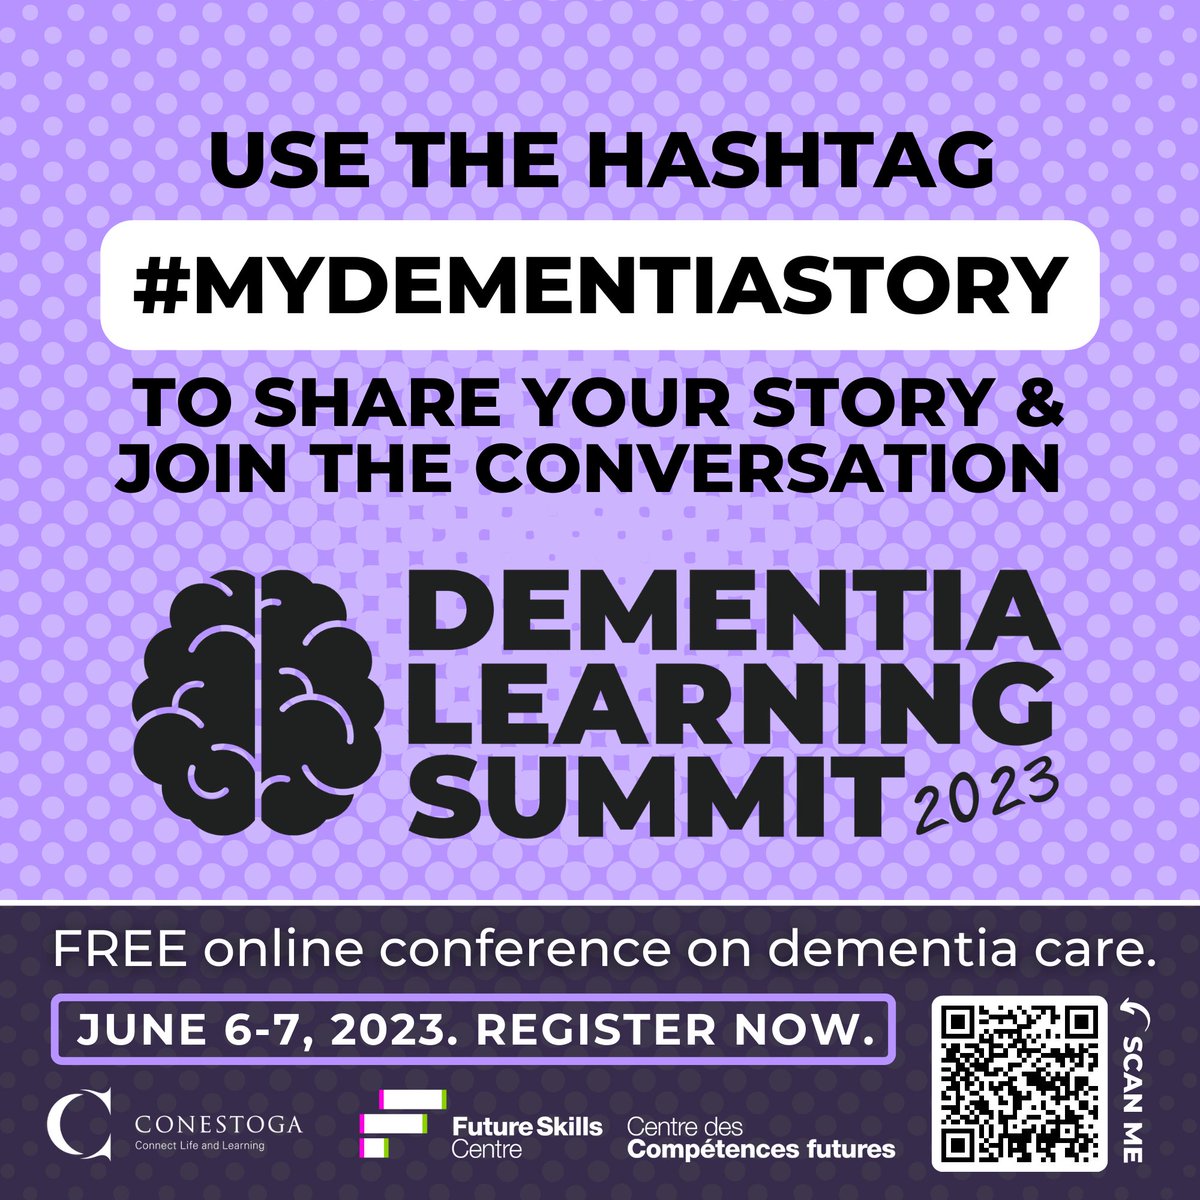 We look forward to your stories with #dementia at the #DementiaLS23.

Join us in support of #PLWD and their caregivers tomorrow, for the 2day event (June 6-7): tinyurl.com/mrcrmk6y #ConestogaCRADLE #DementiaLS23 @fsc_ccf_en